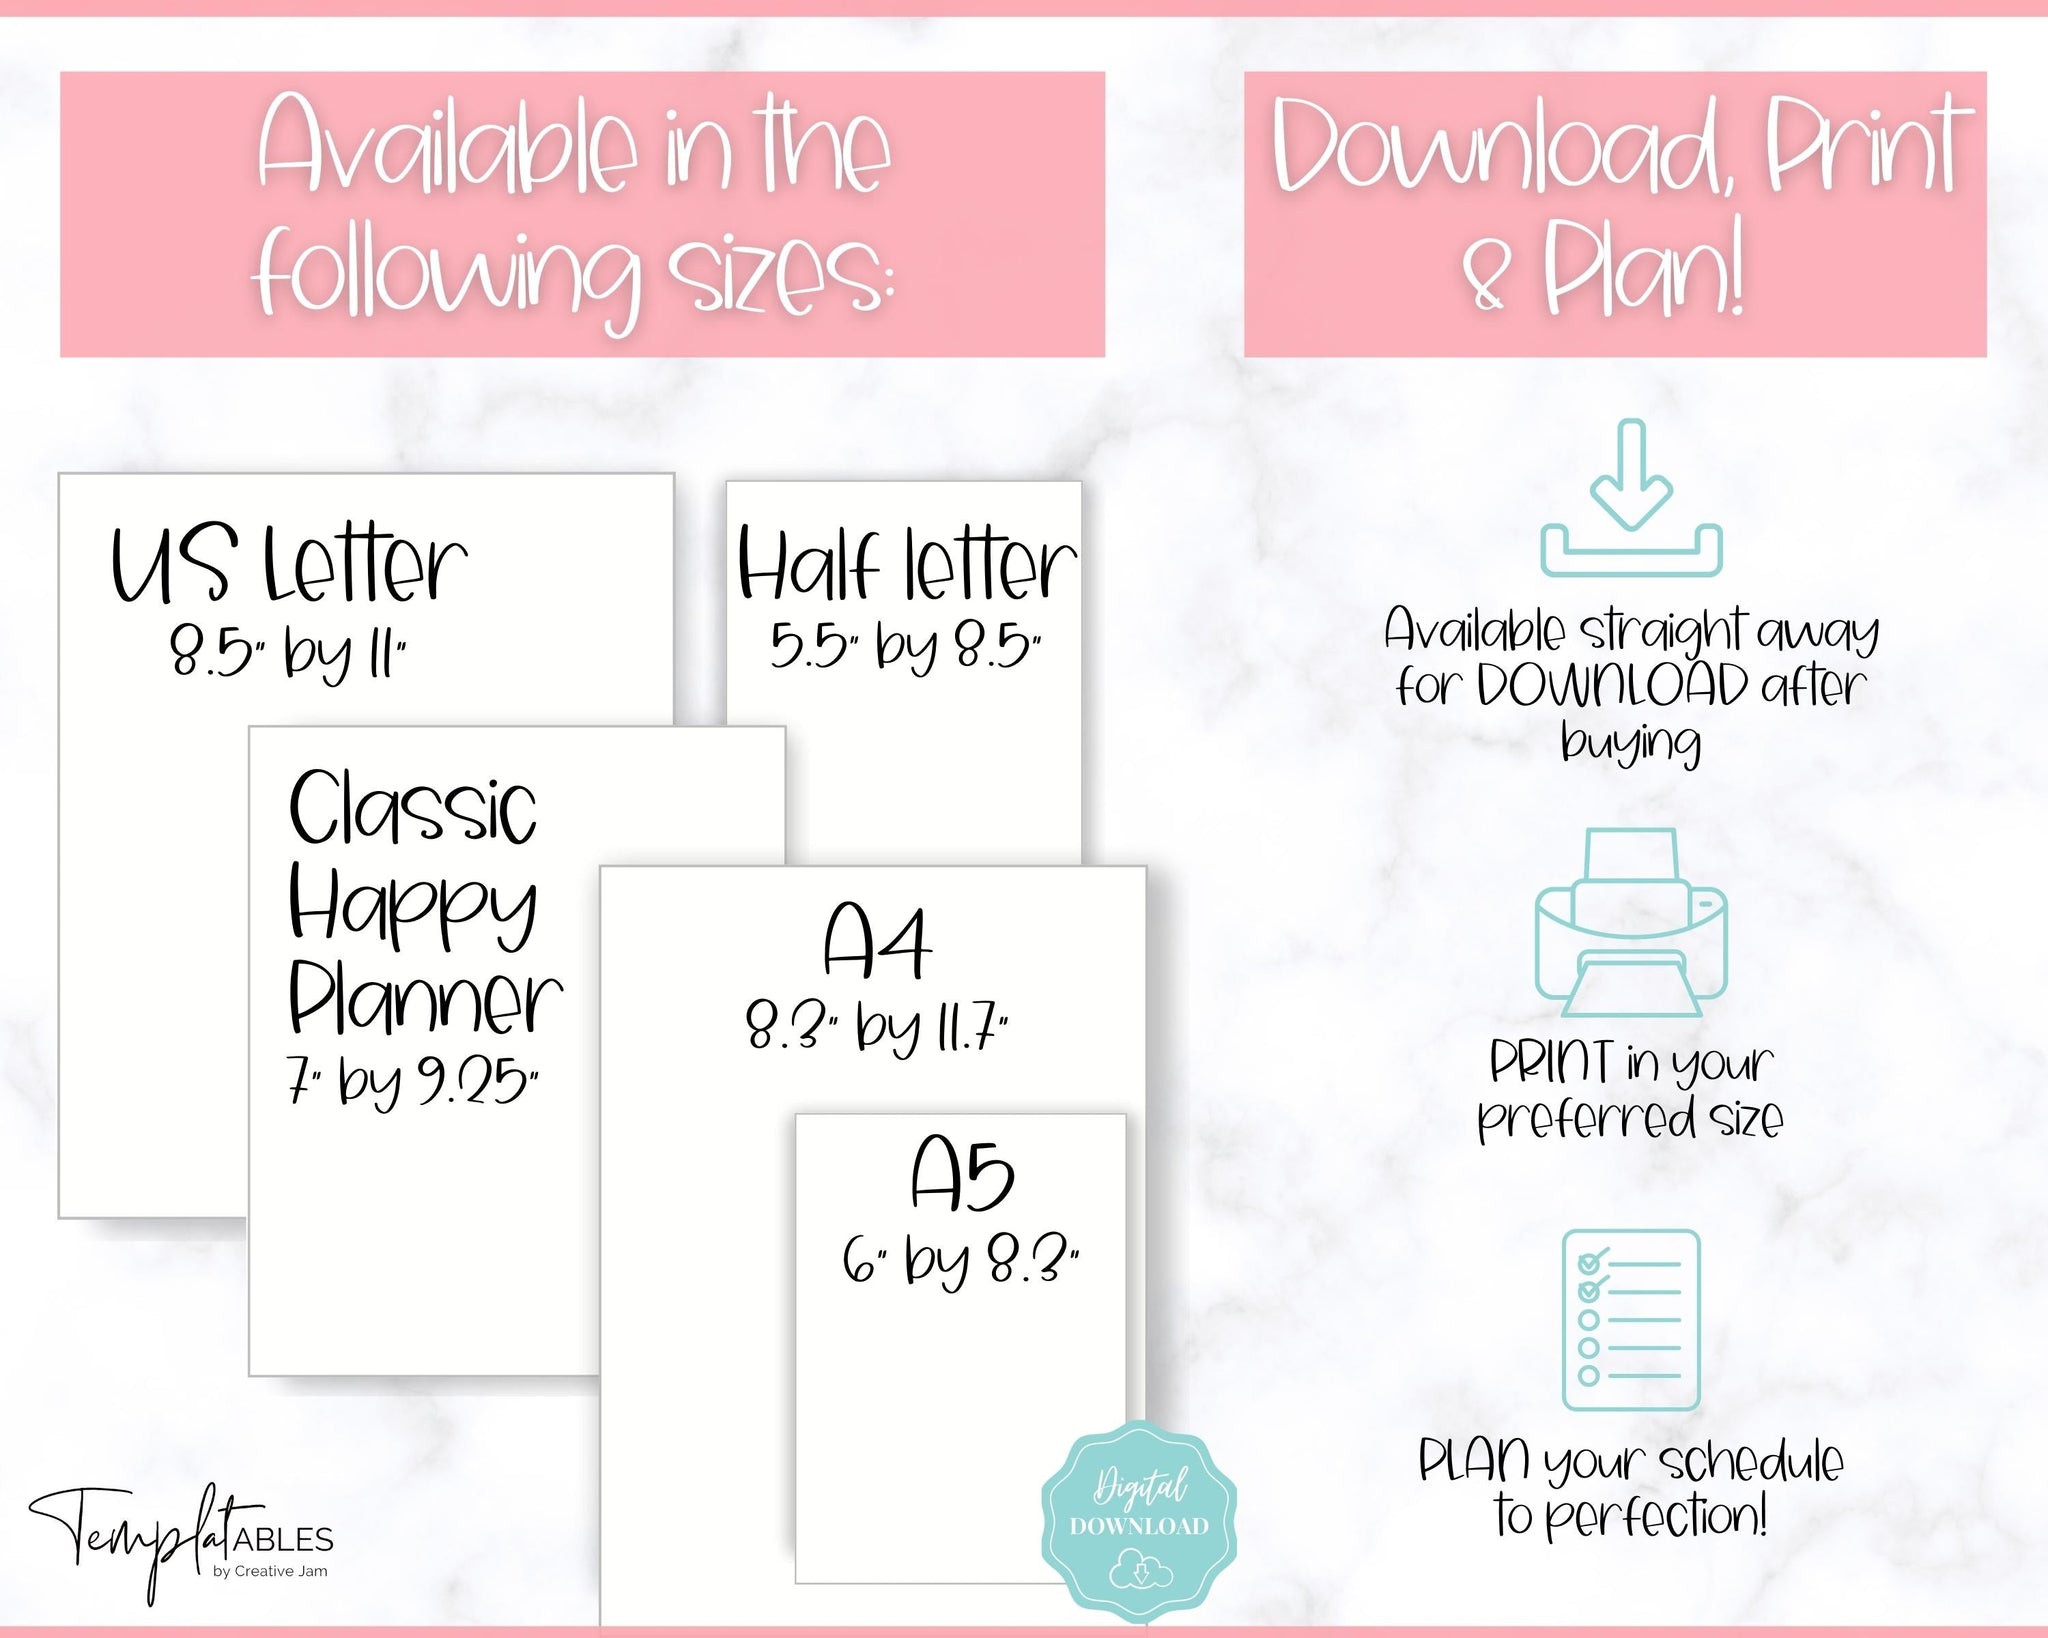 Daily Planner Printable, Half Hour Daily Planner, Day Planner, Productivity  Planner, Daily Schedule, Daily to Do List, Printable Planner 